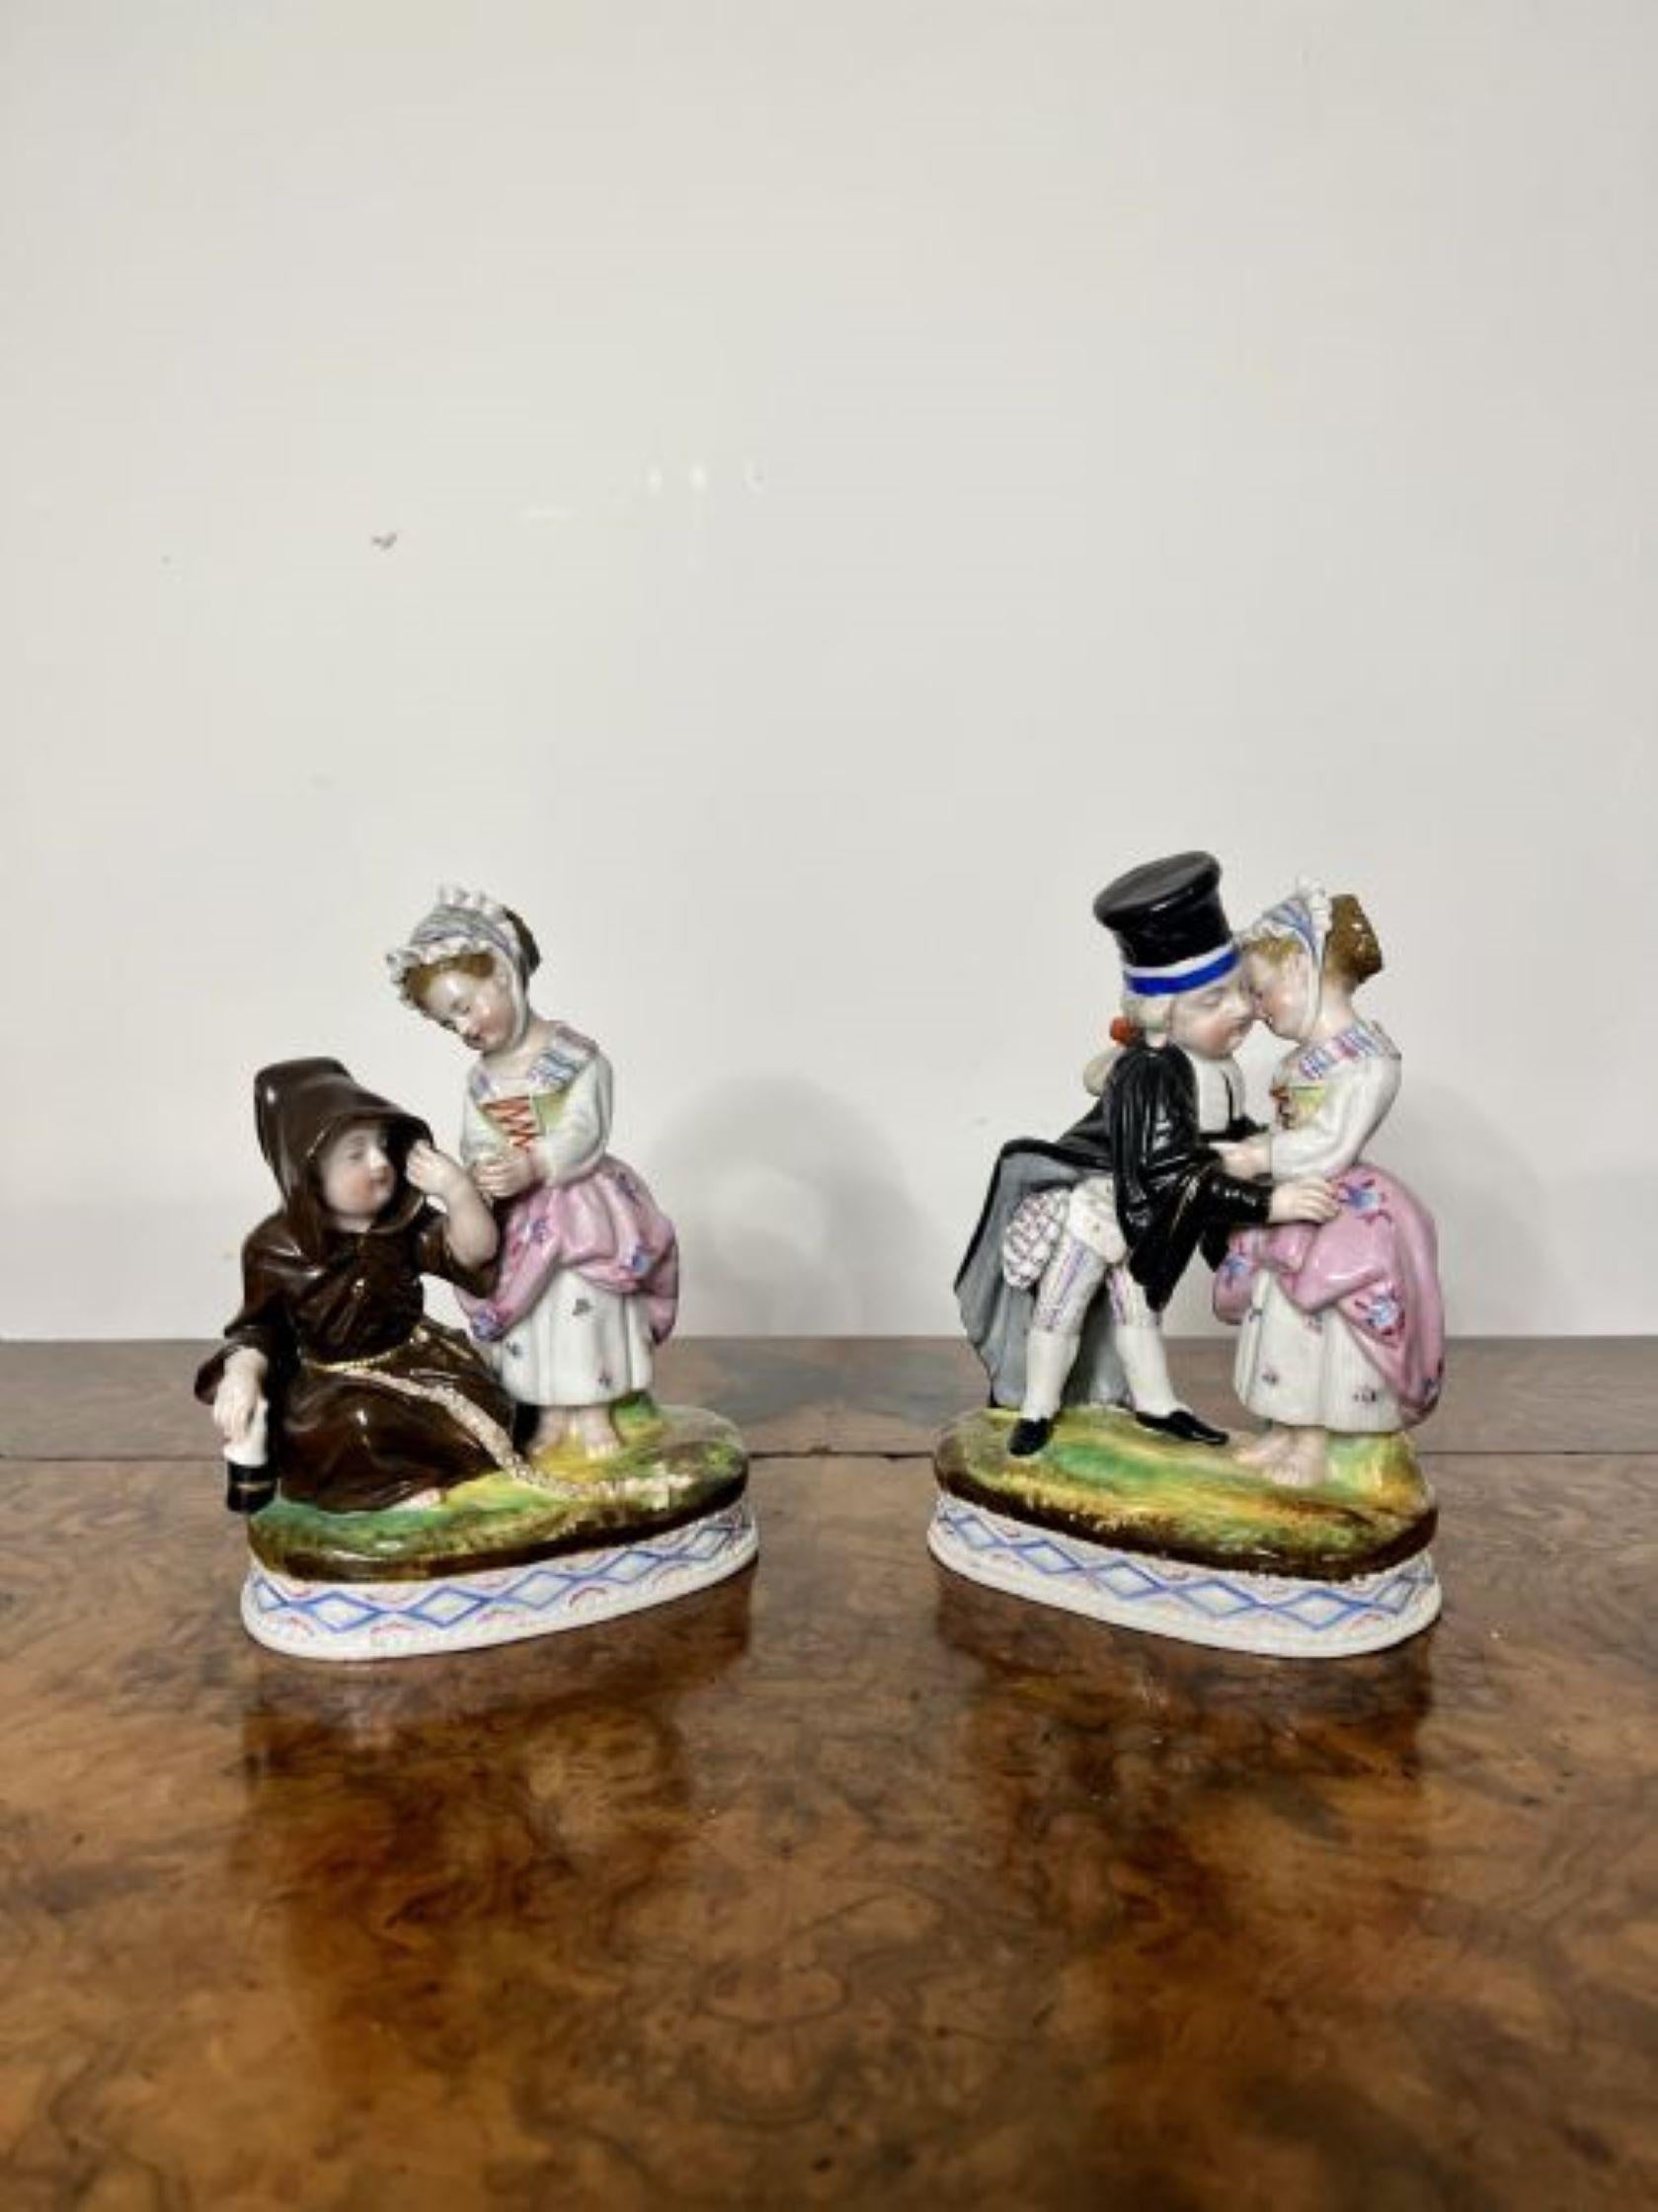 Pair of antique Victorian continental quality porcelain figures, having a quality pair of figures dressed in period clothing telling a story loving someone for richer or poorer, sickness or health, in wonderful hand painted pink, blue, yellow, green